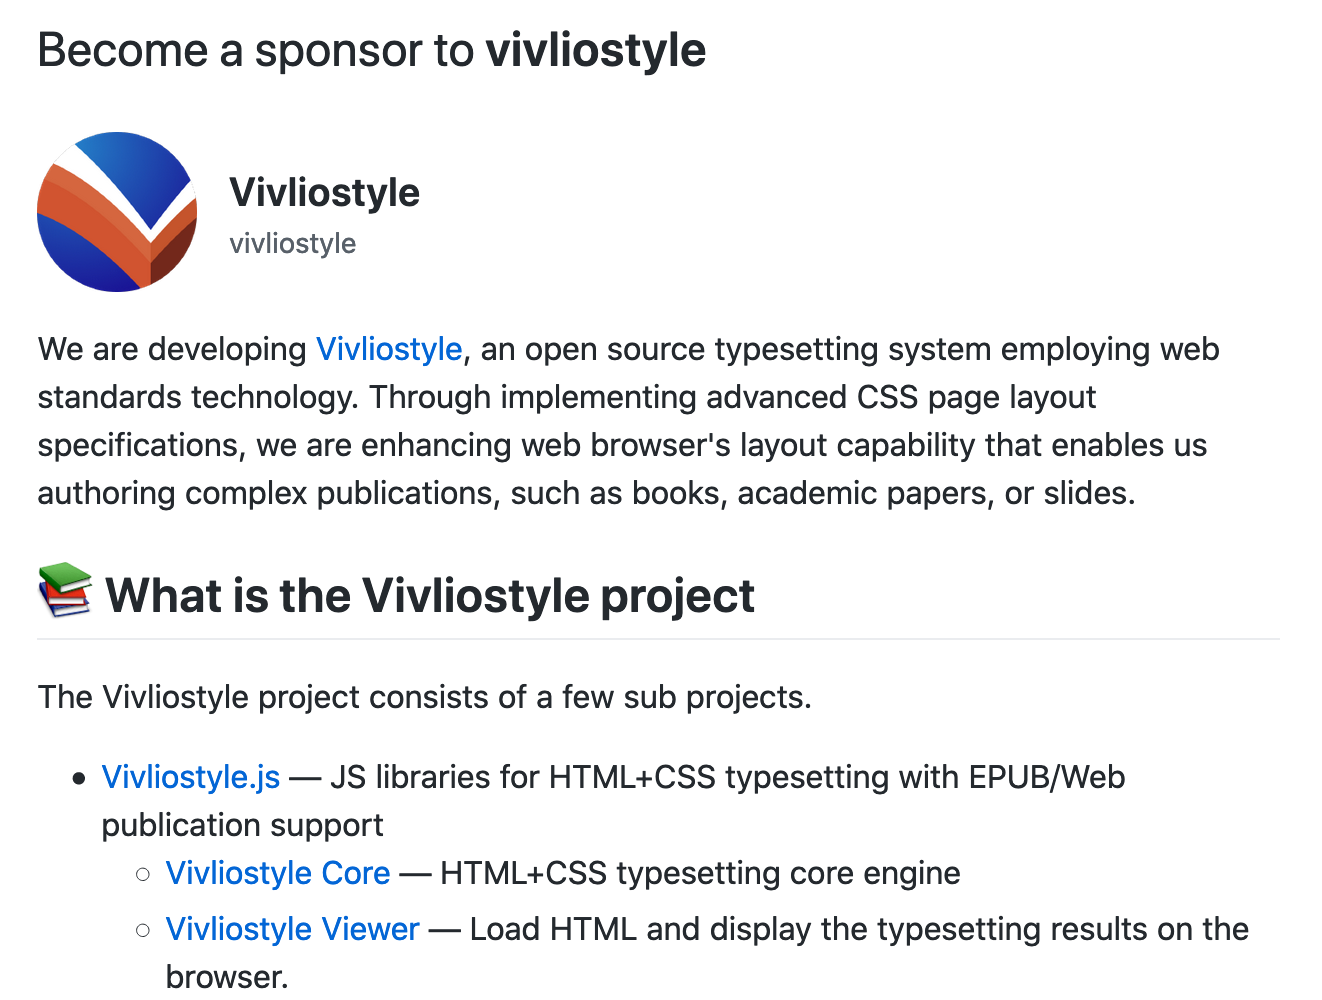 Become a sponsor to Vivliostyle